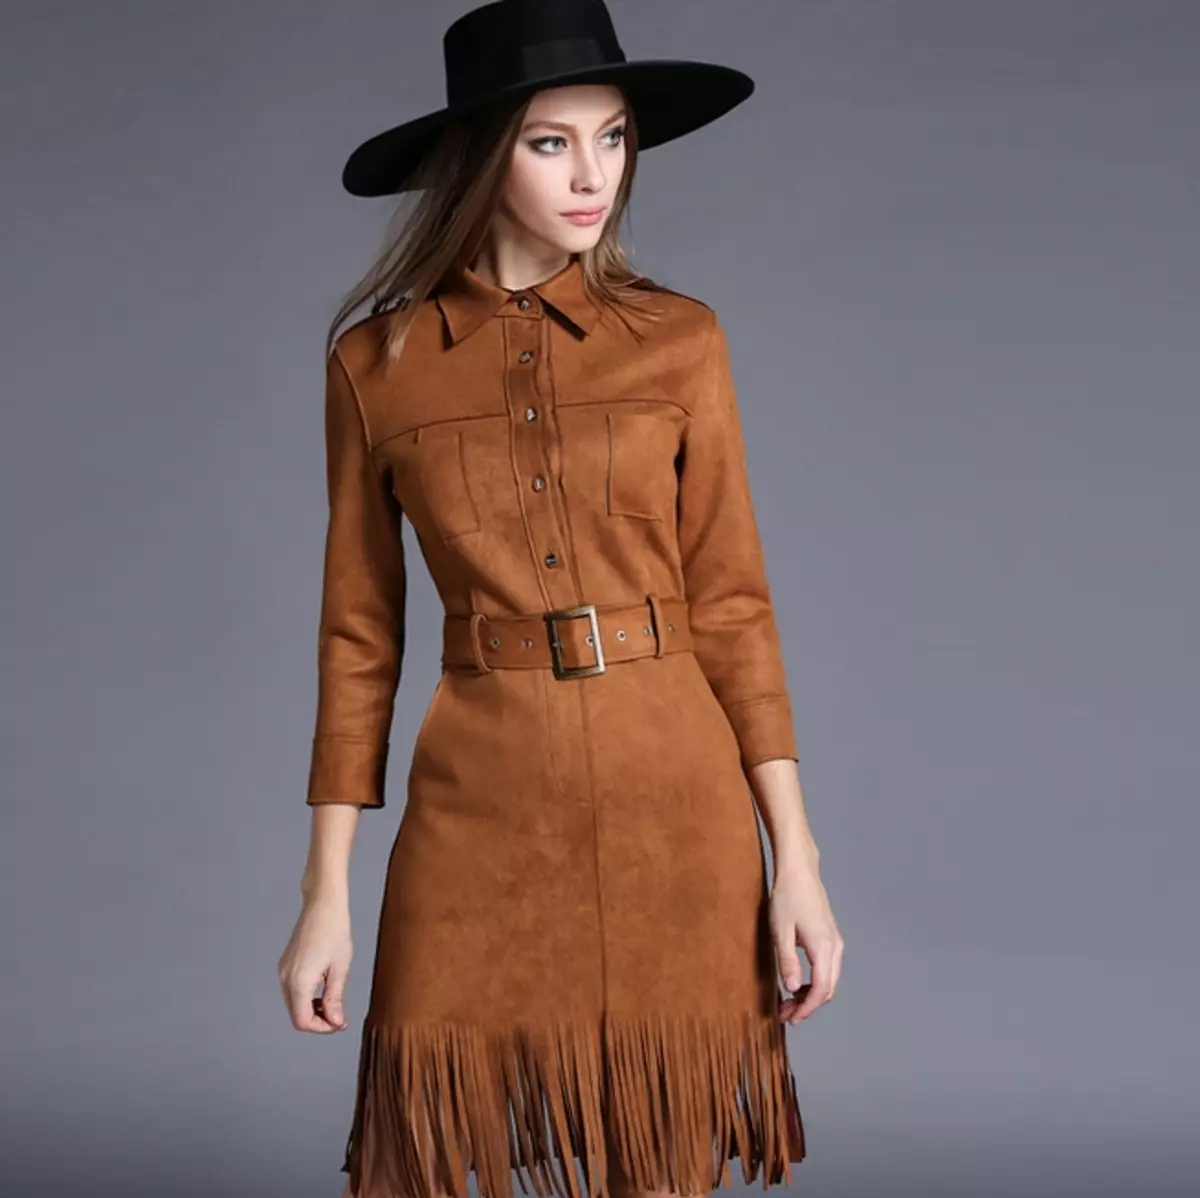 Cowboy style (58 photos): What clothes are suitable for women how to create a wardrobe 3719_8